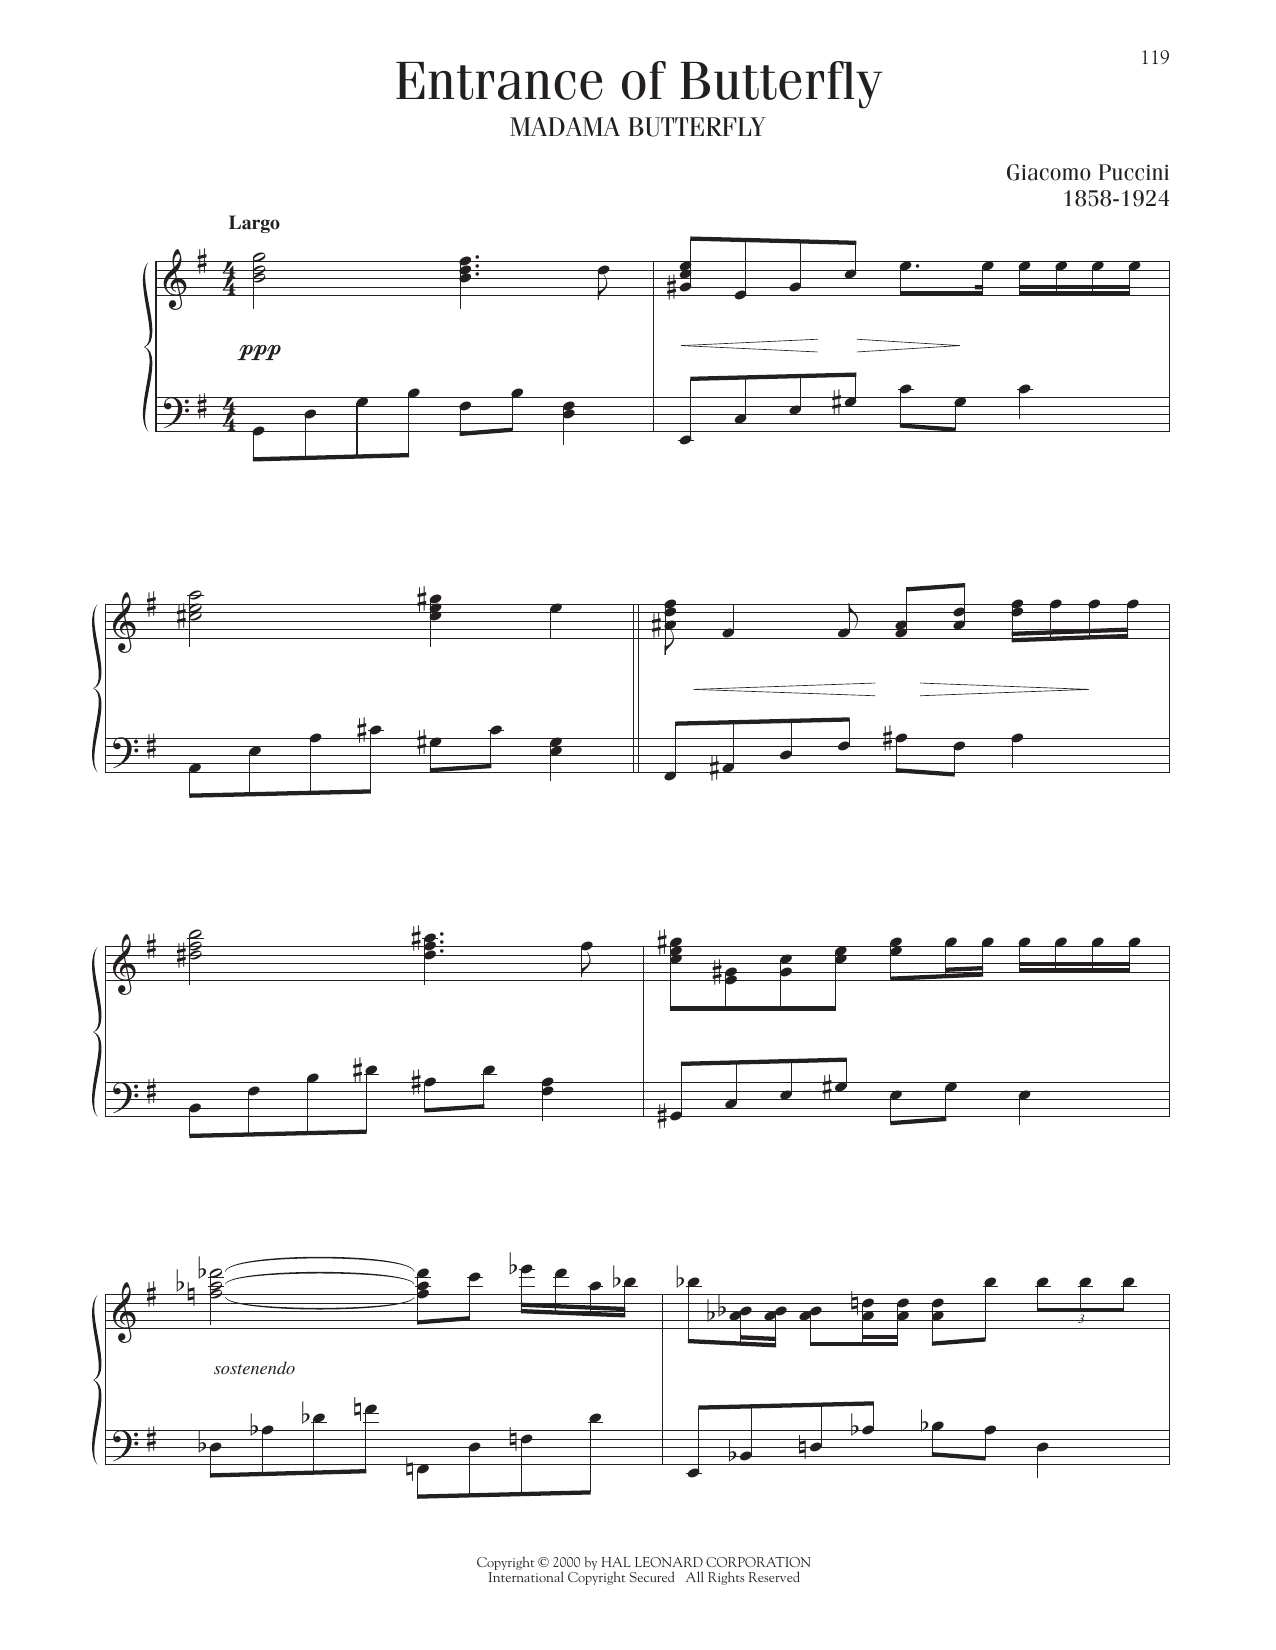 Giacomo Puccini Entrance Of Butterfly sheet music notes printable PDF score